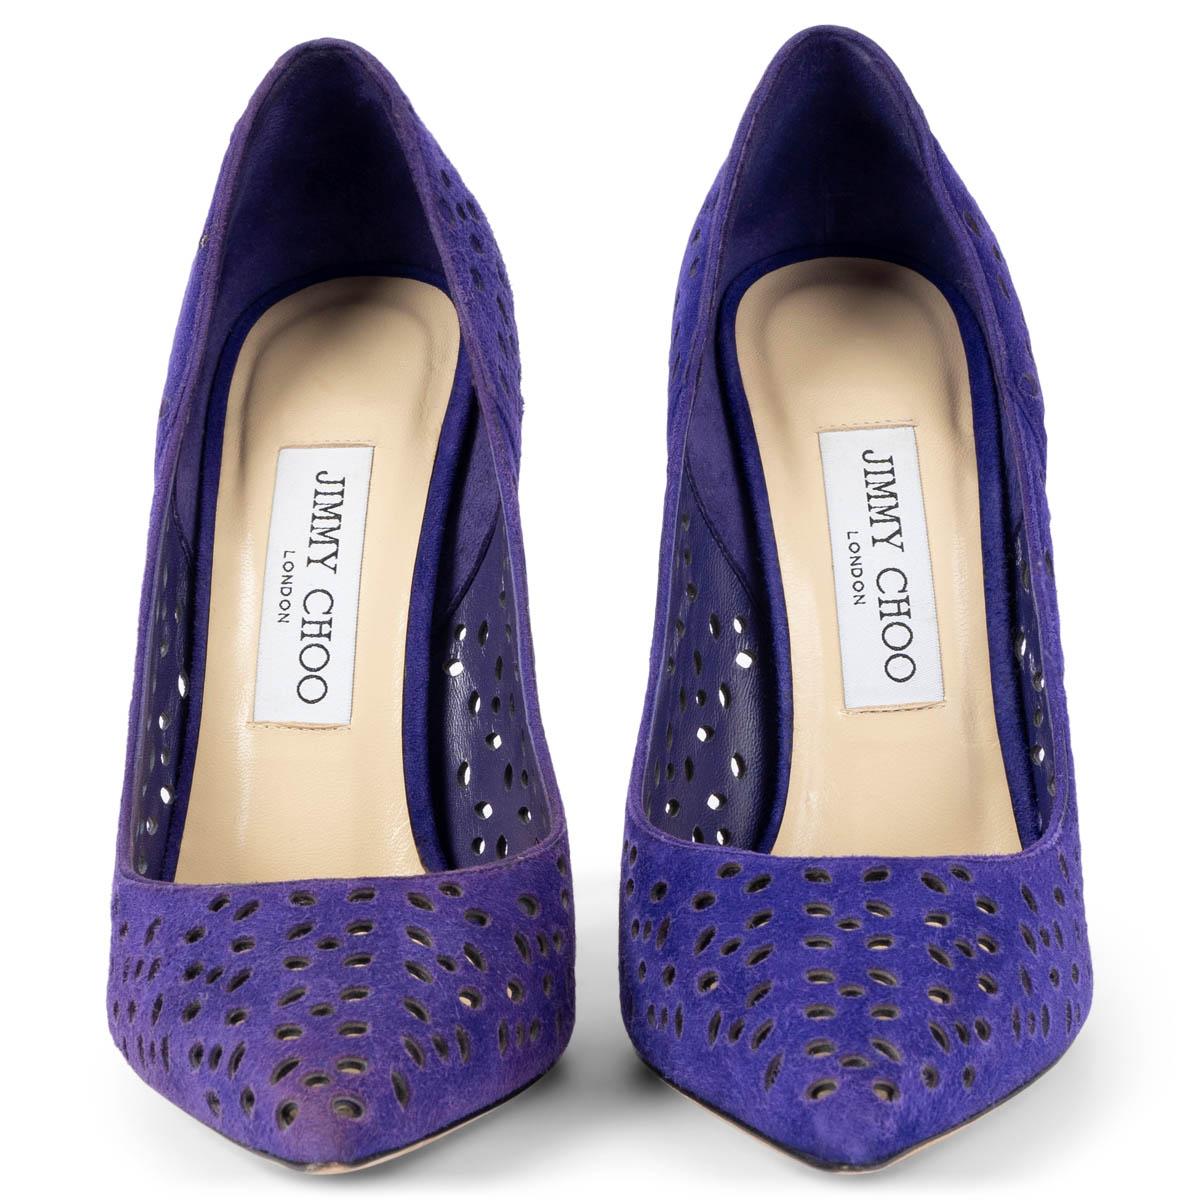 100% authentic Jimmy Choo Anouk perforated pumps in purple suede. Have been worn once inside and are in virtually new condition. Come with dust bag. 

Measurements
Imprinted Size	37.5
Shoe Size	37.5
Inside Sole	24.5cm (9.6in)
Width	7cm